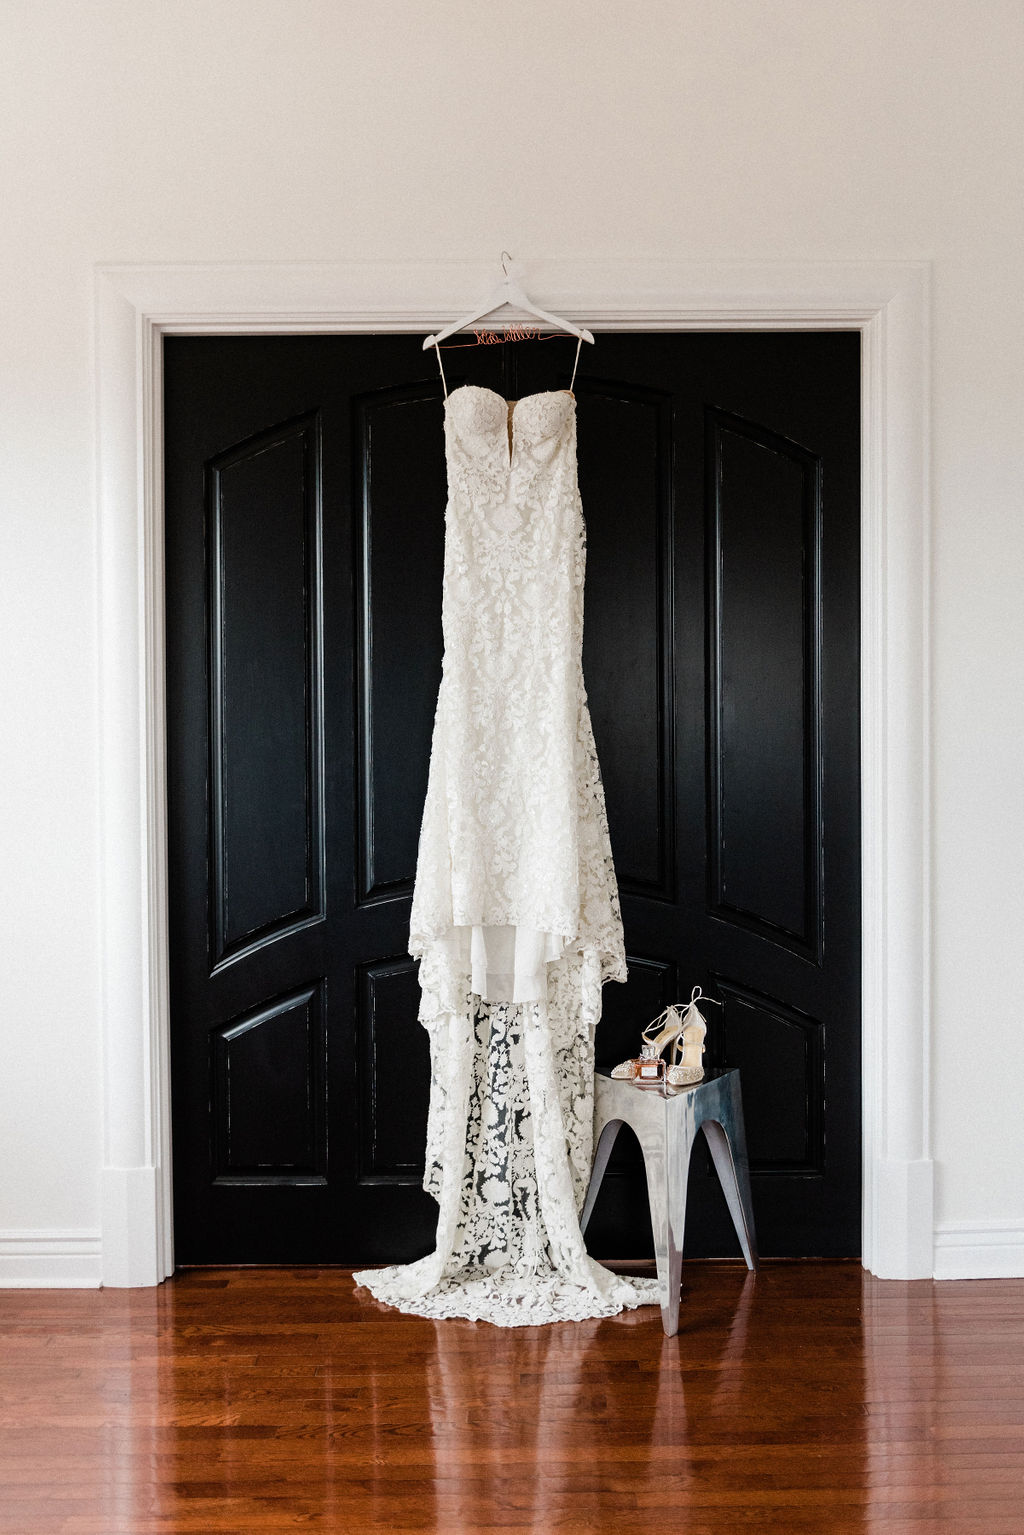 A bridal gown hanging